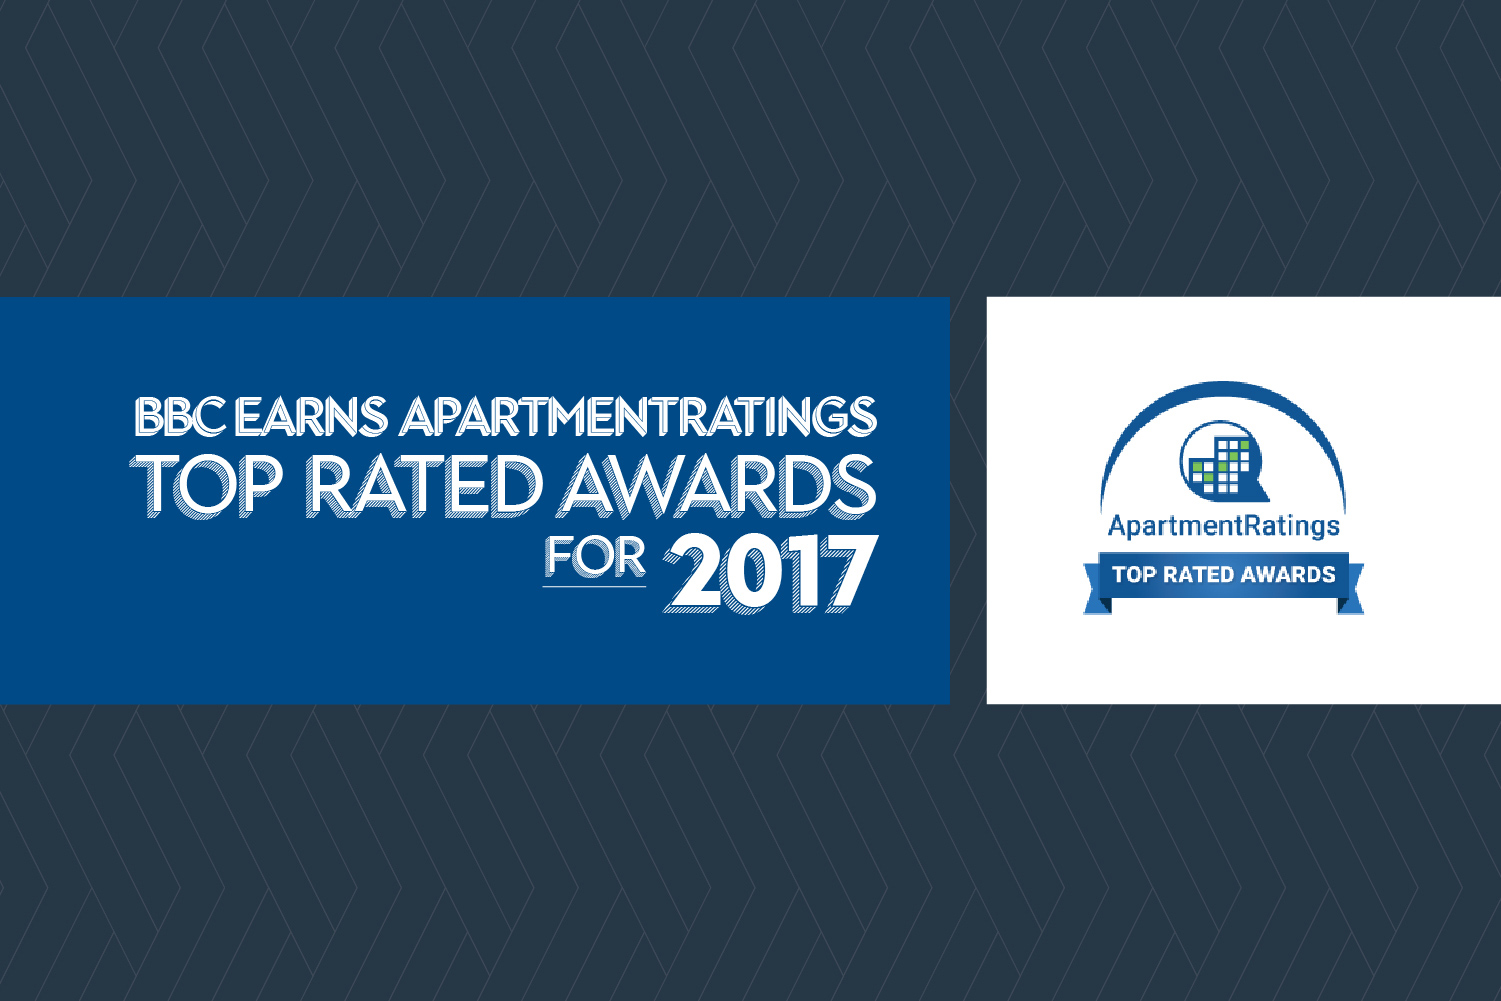 Balfour Beatty Communities Earns Apartment Ratings Top Rated Awards for 2017